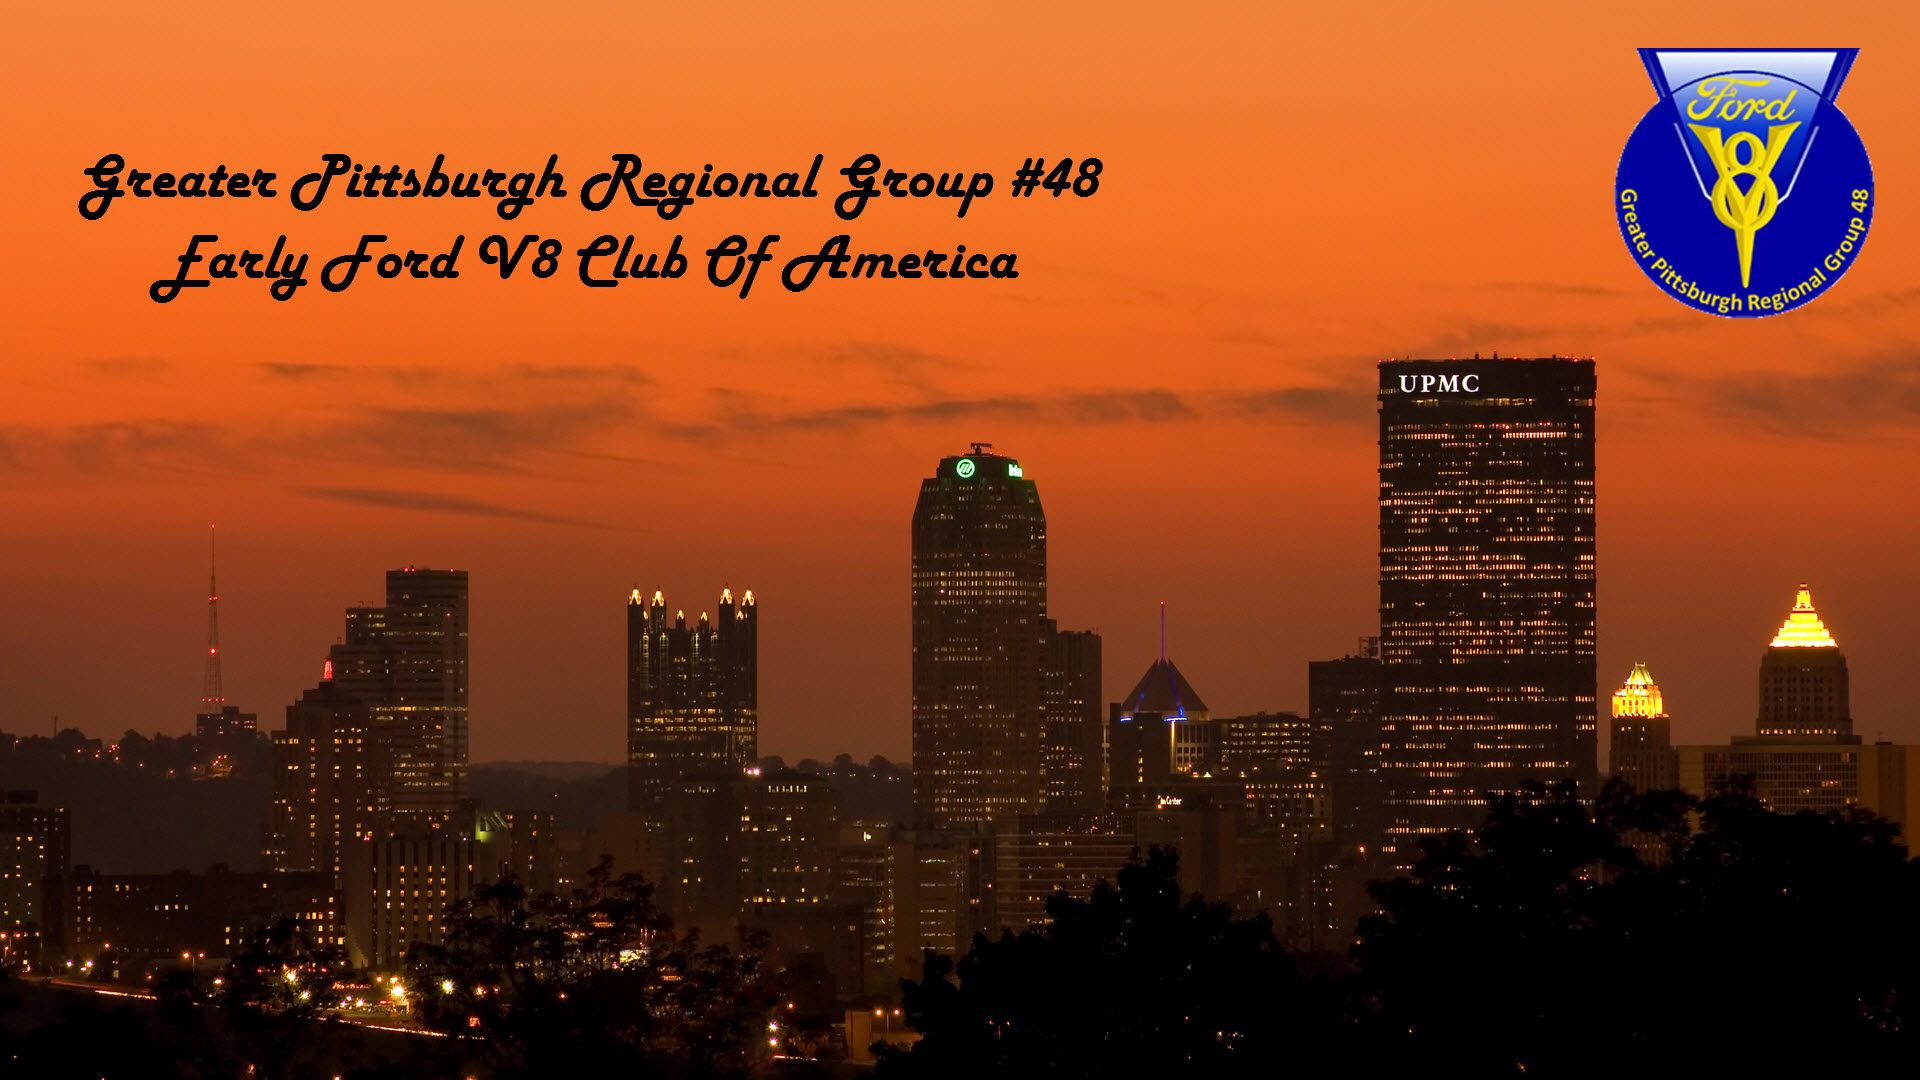 The Regional Group 38